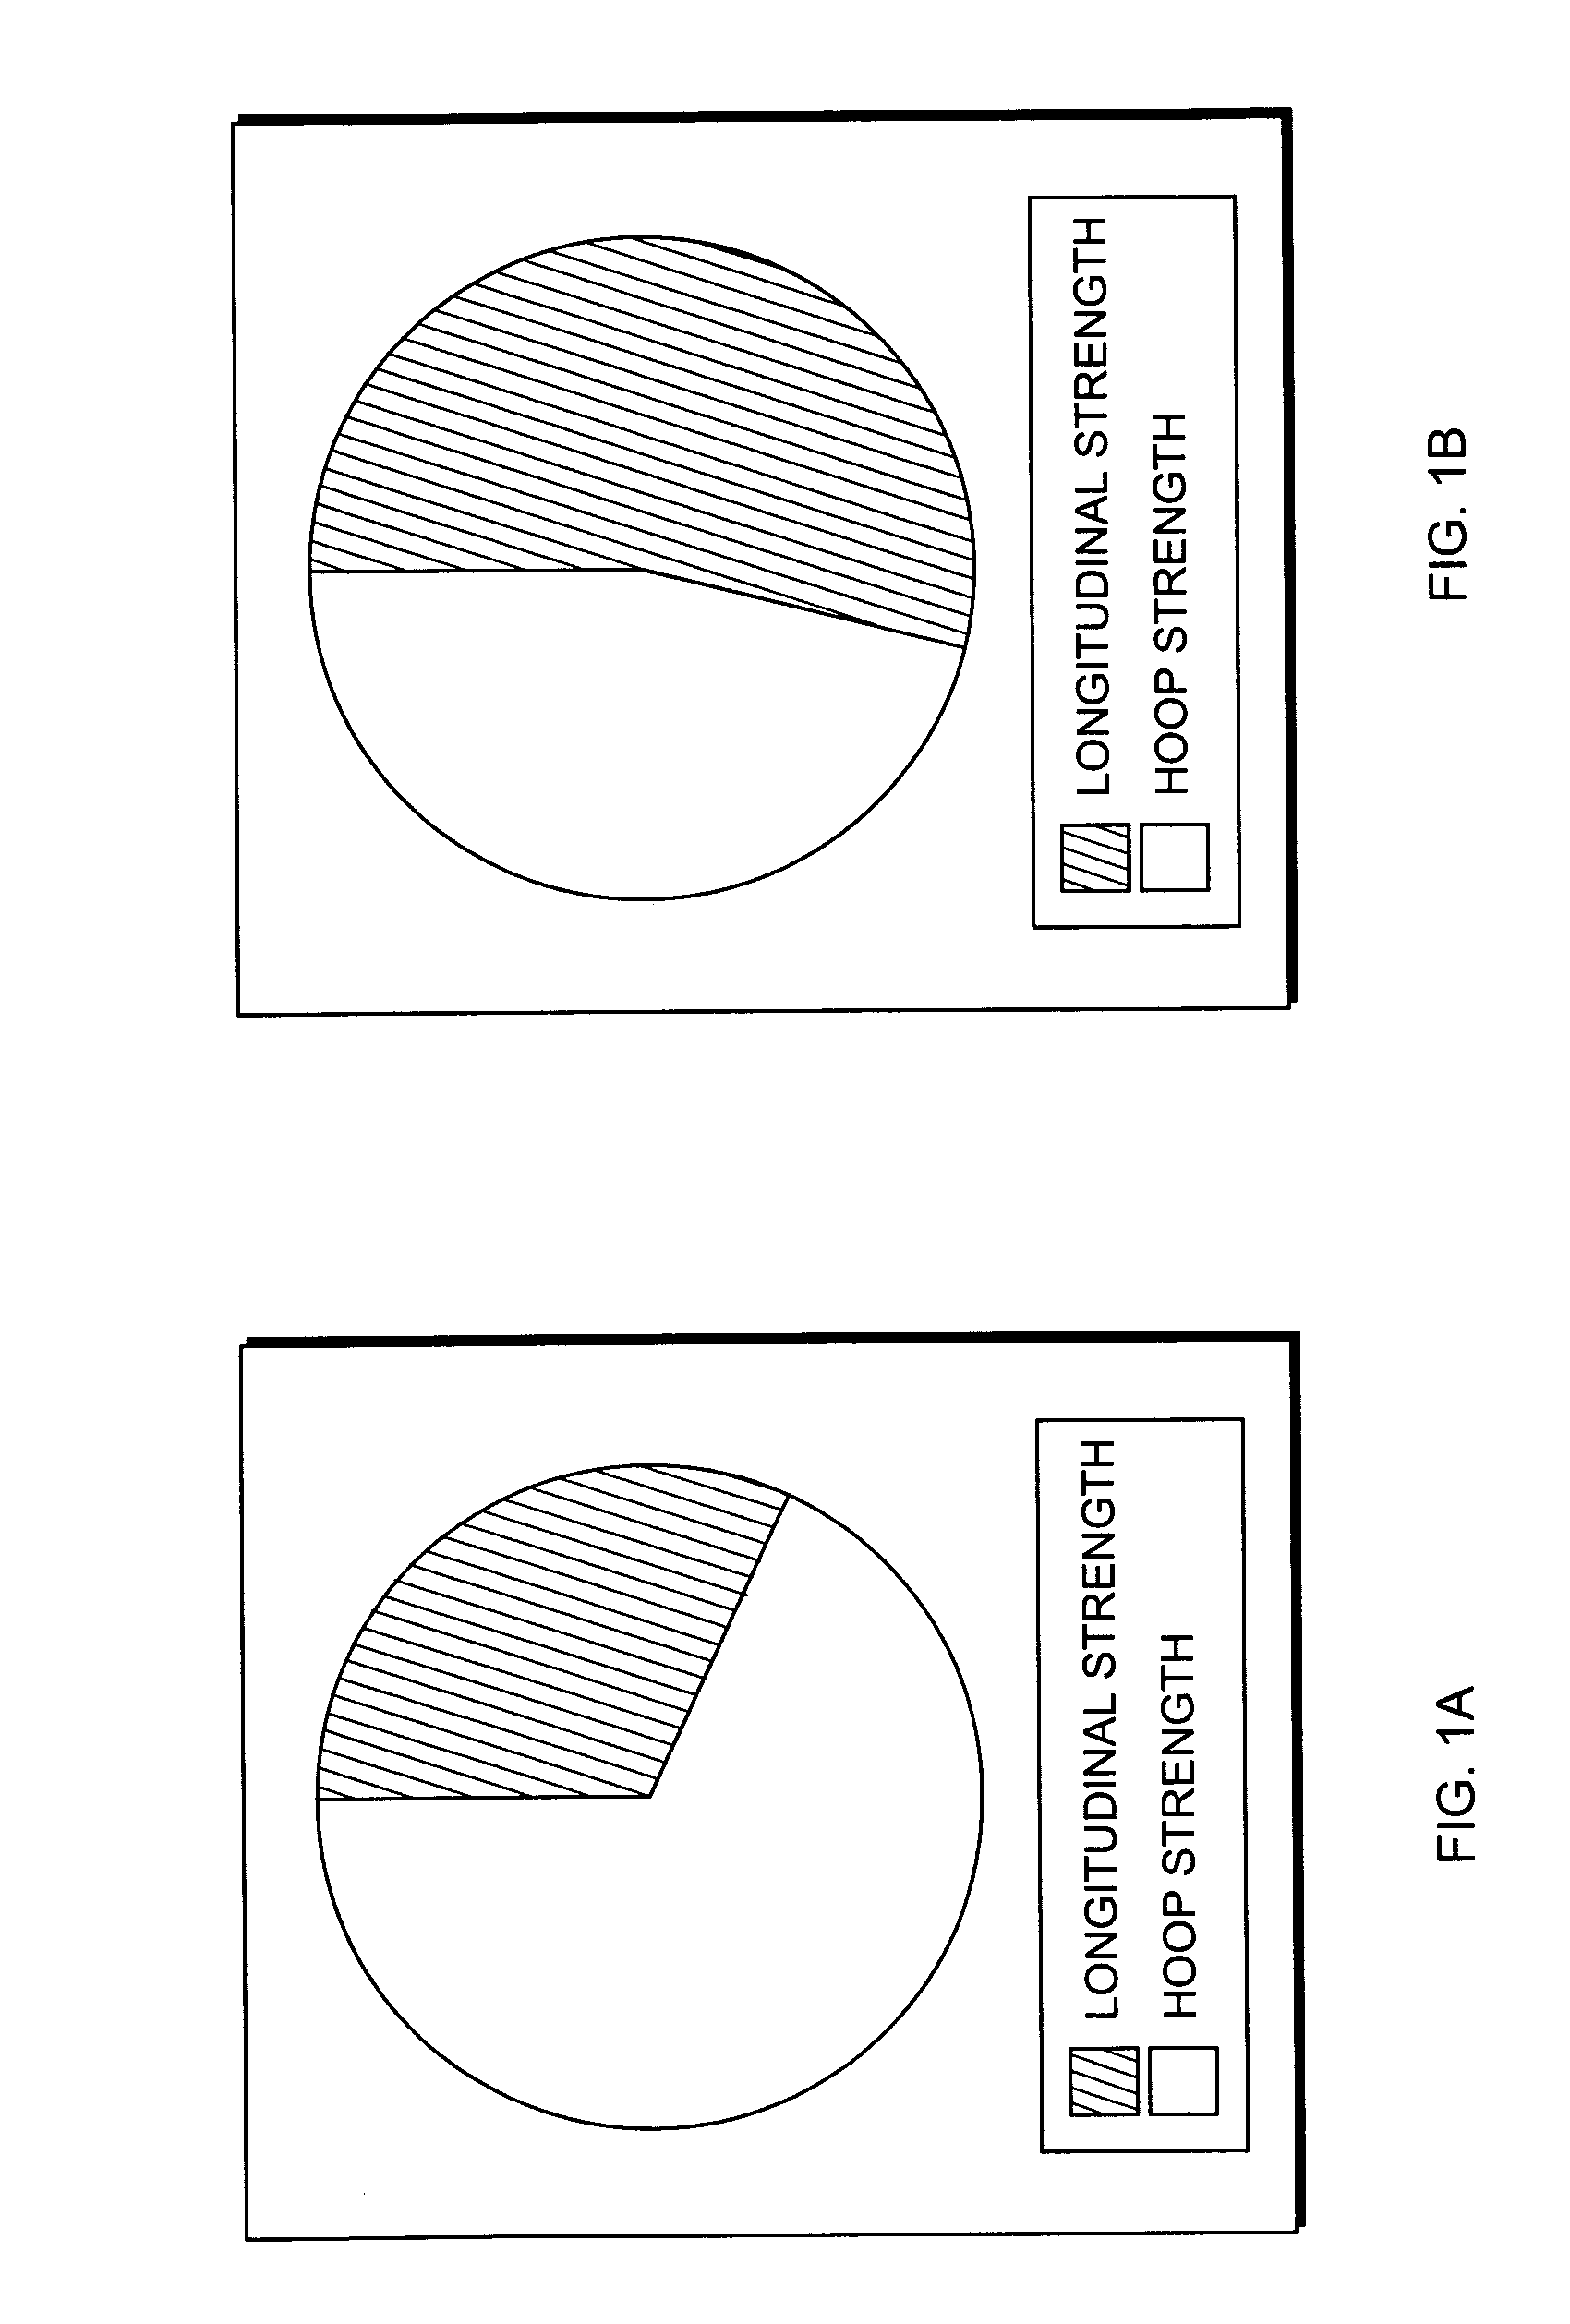 Bi-directional substrate design for aircraft escape slide airbeams